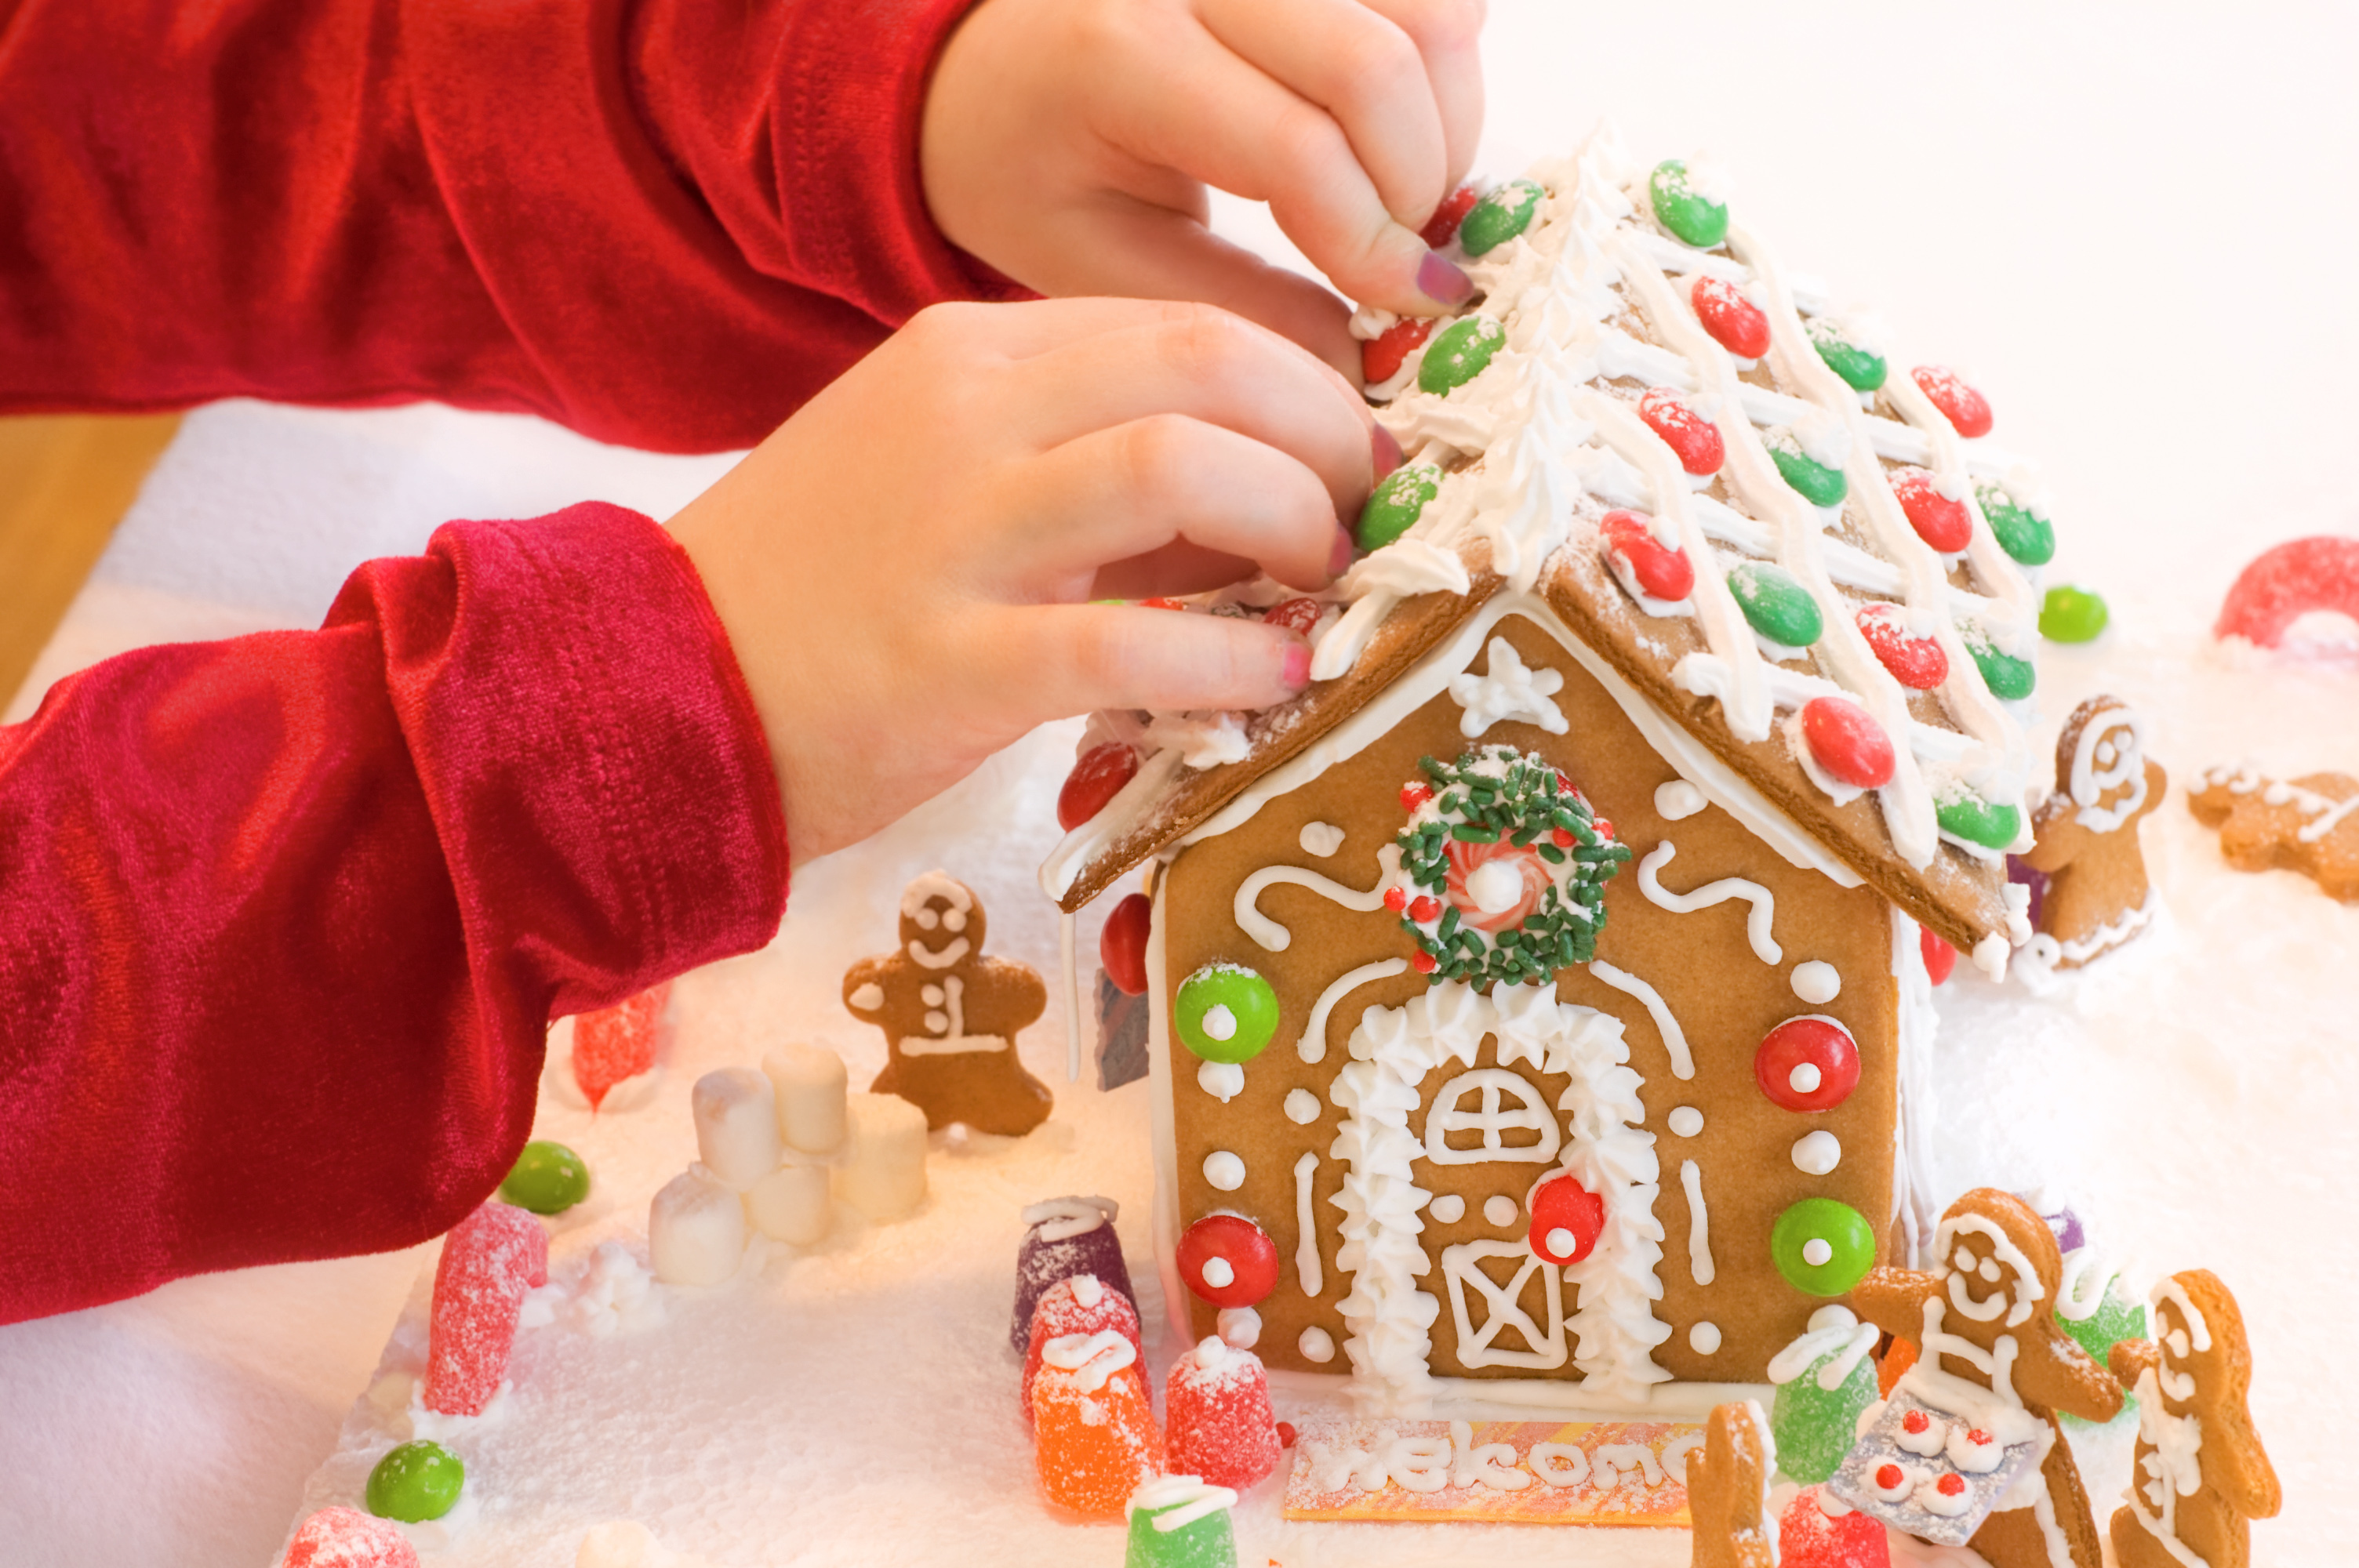 Child's hands shown decorating a Gingerbread House